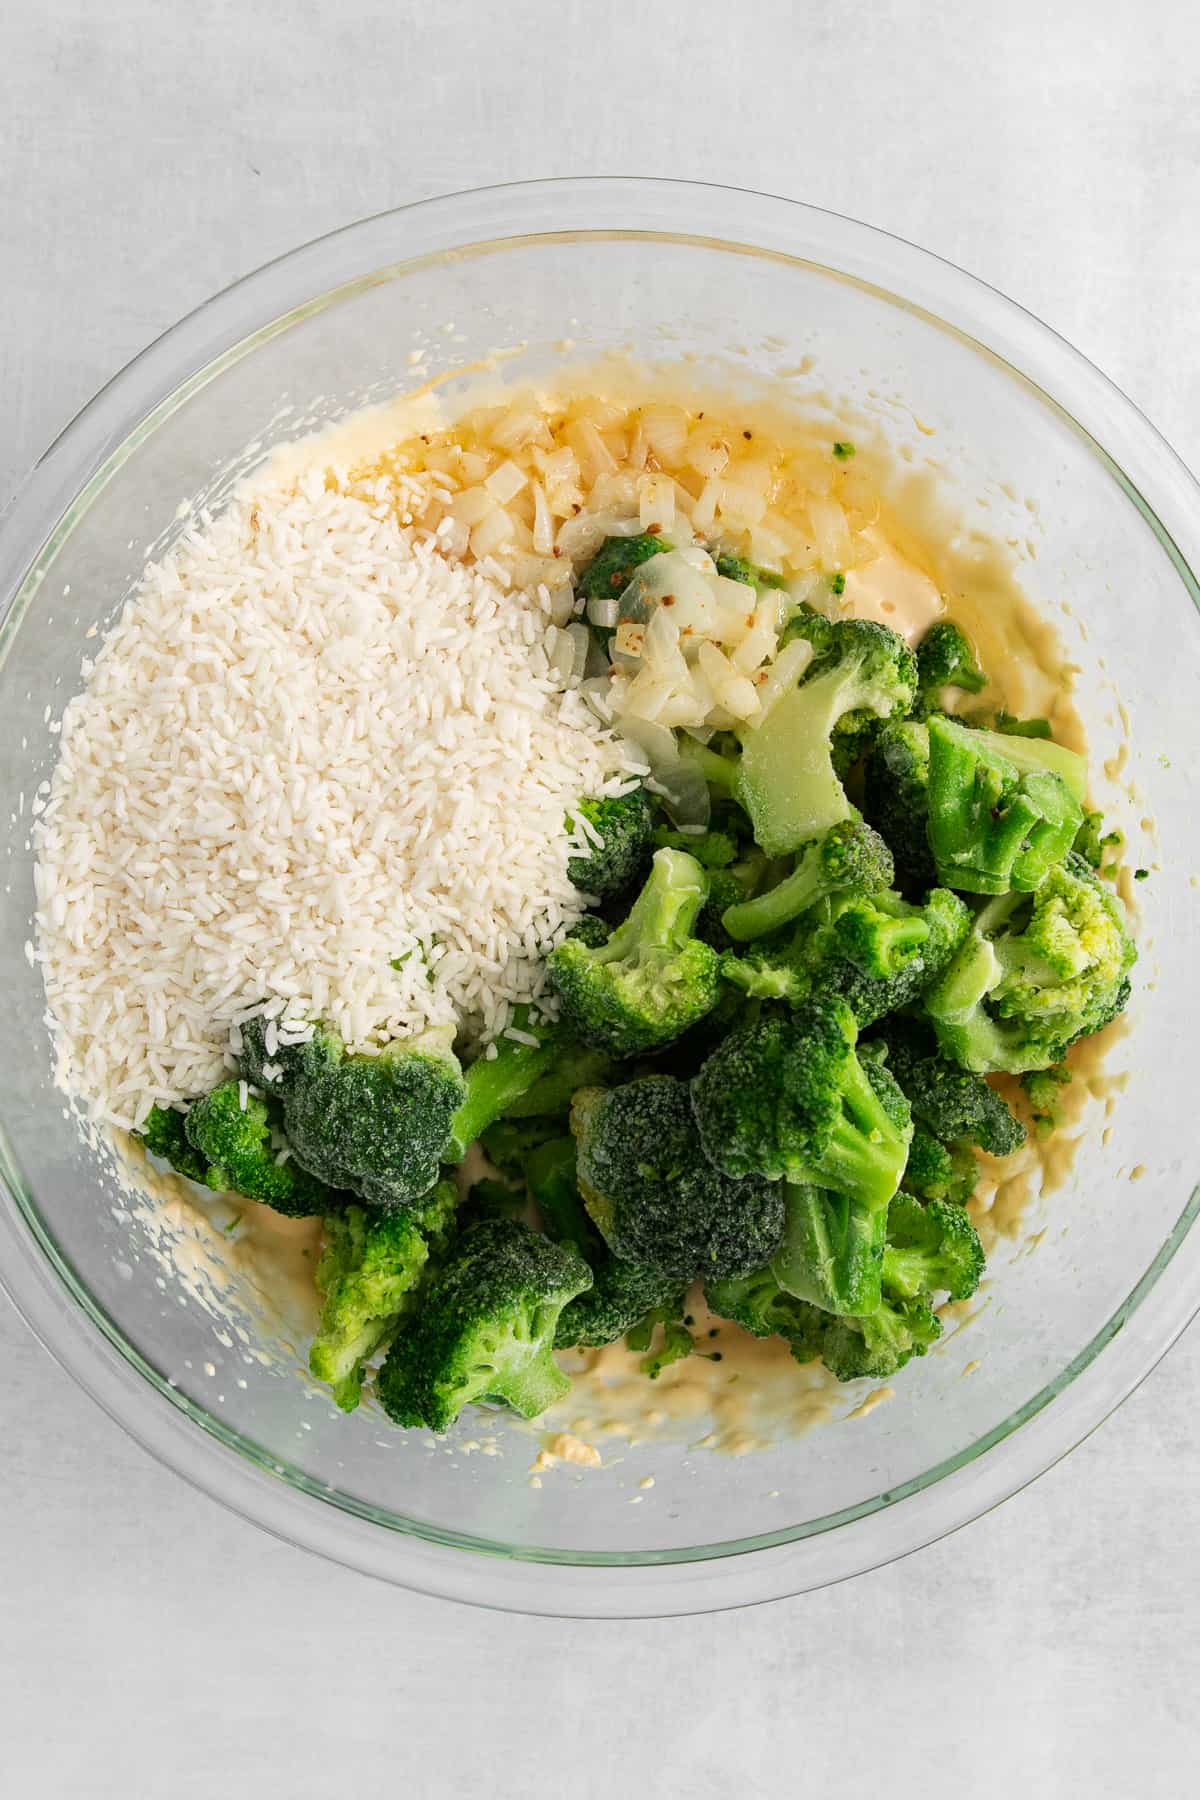 Broccoli, cheese and rice in a bowl.